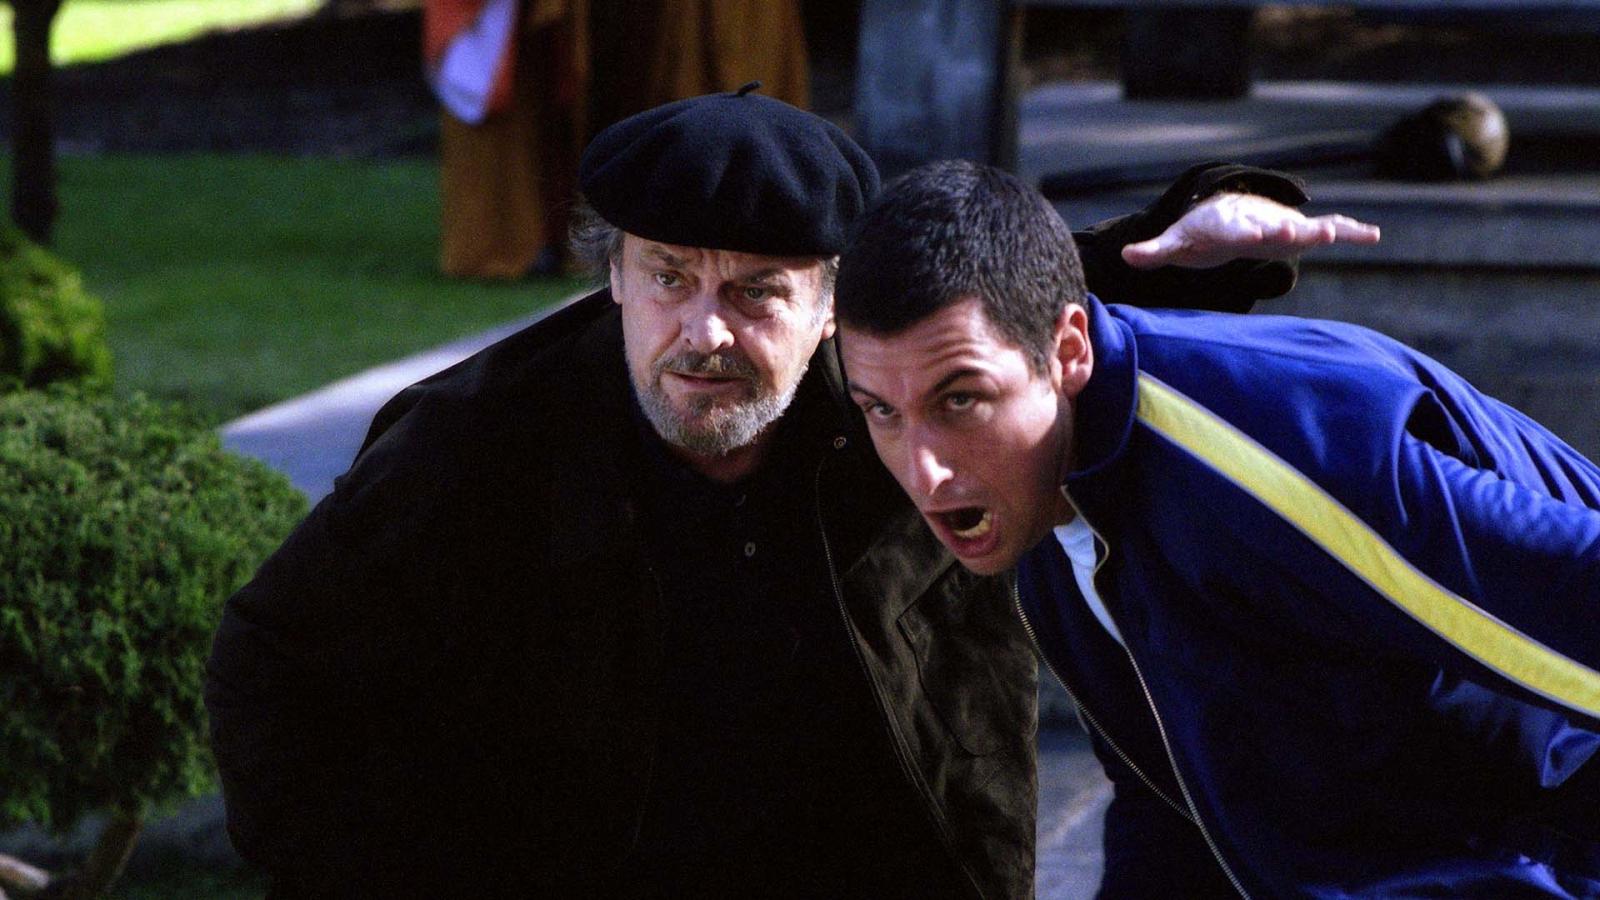 15 Best Movies With Adam Sandler to Watch With Family - image 14